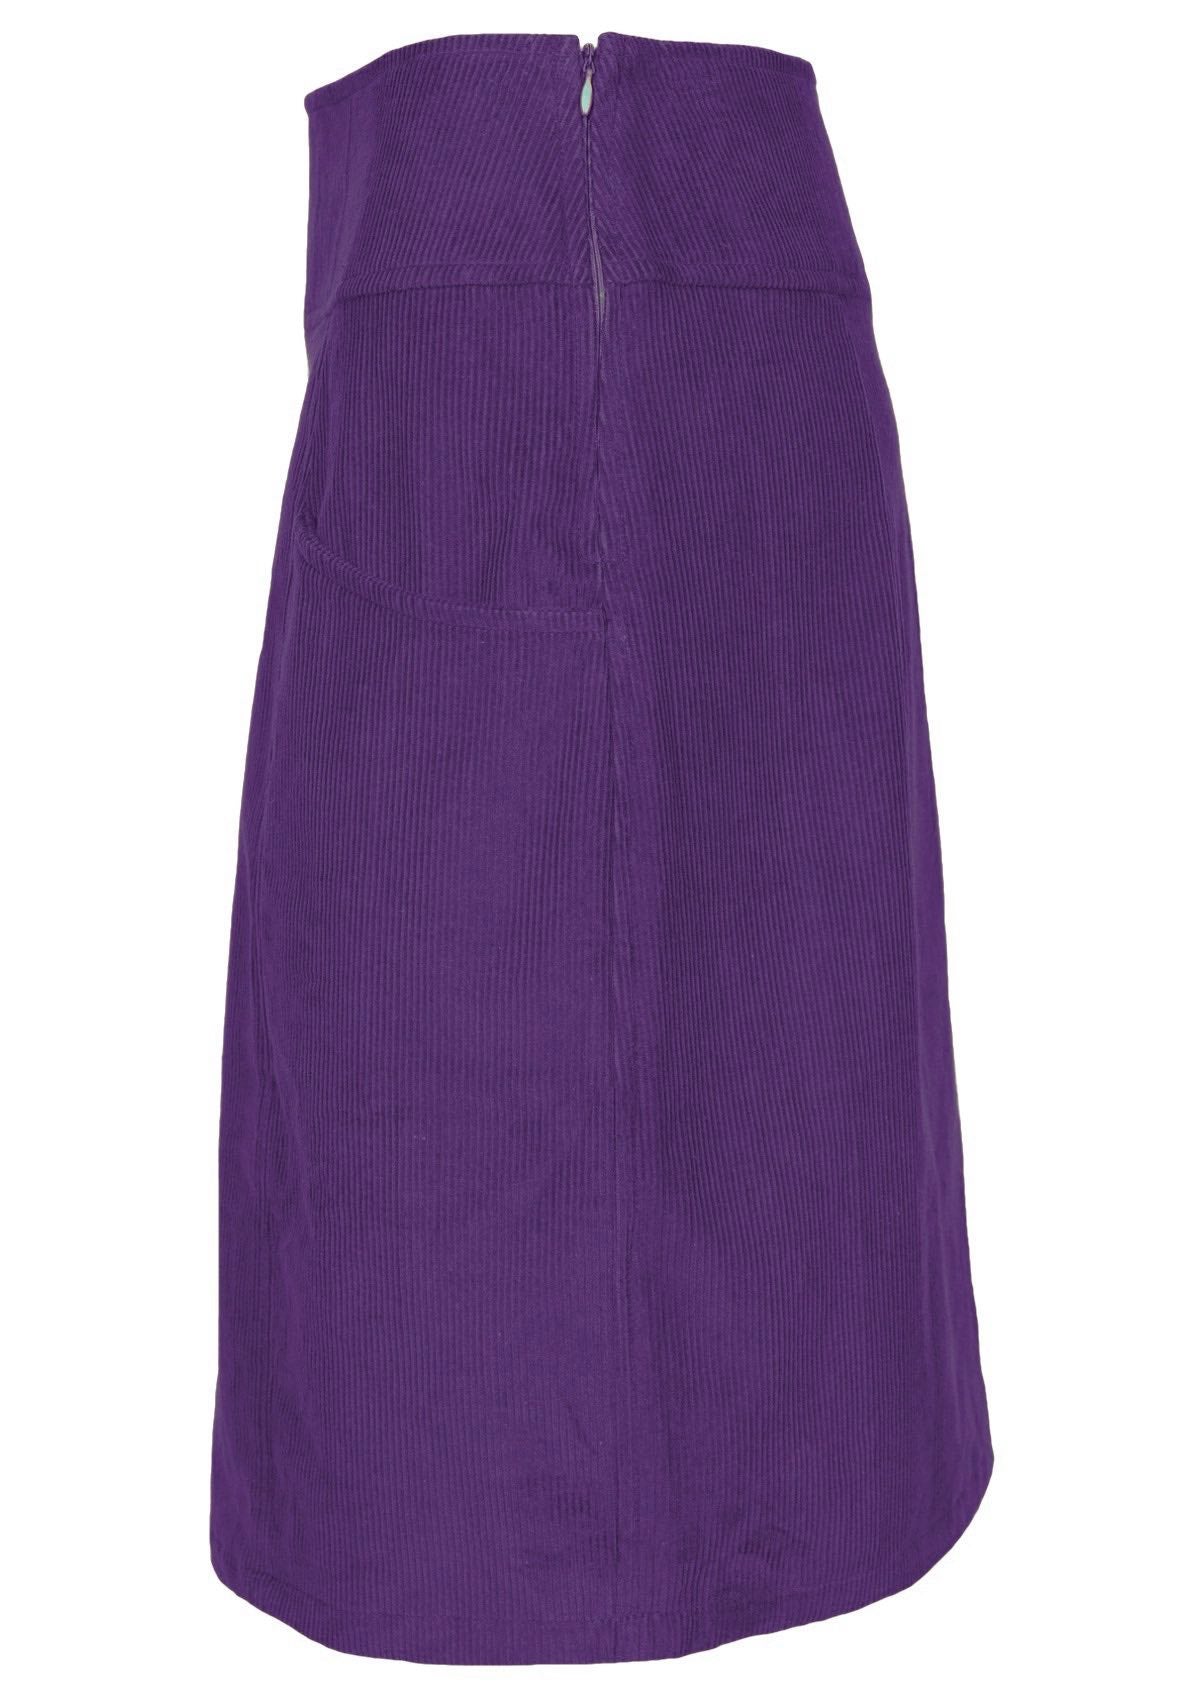 Cotton Corduroy Skirt that can be worn on the hips or waist. 